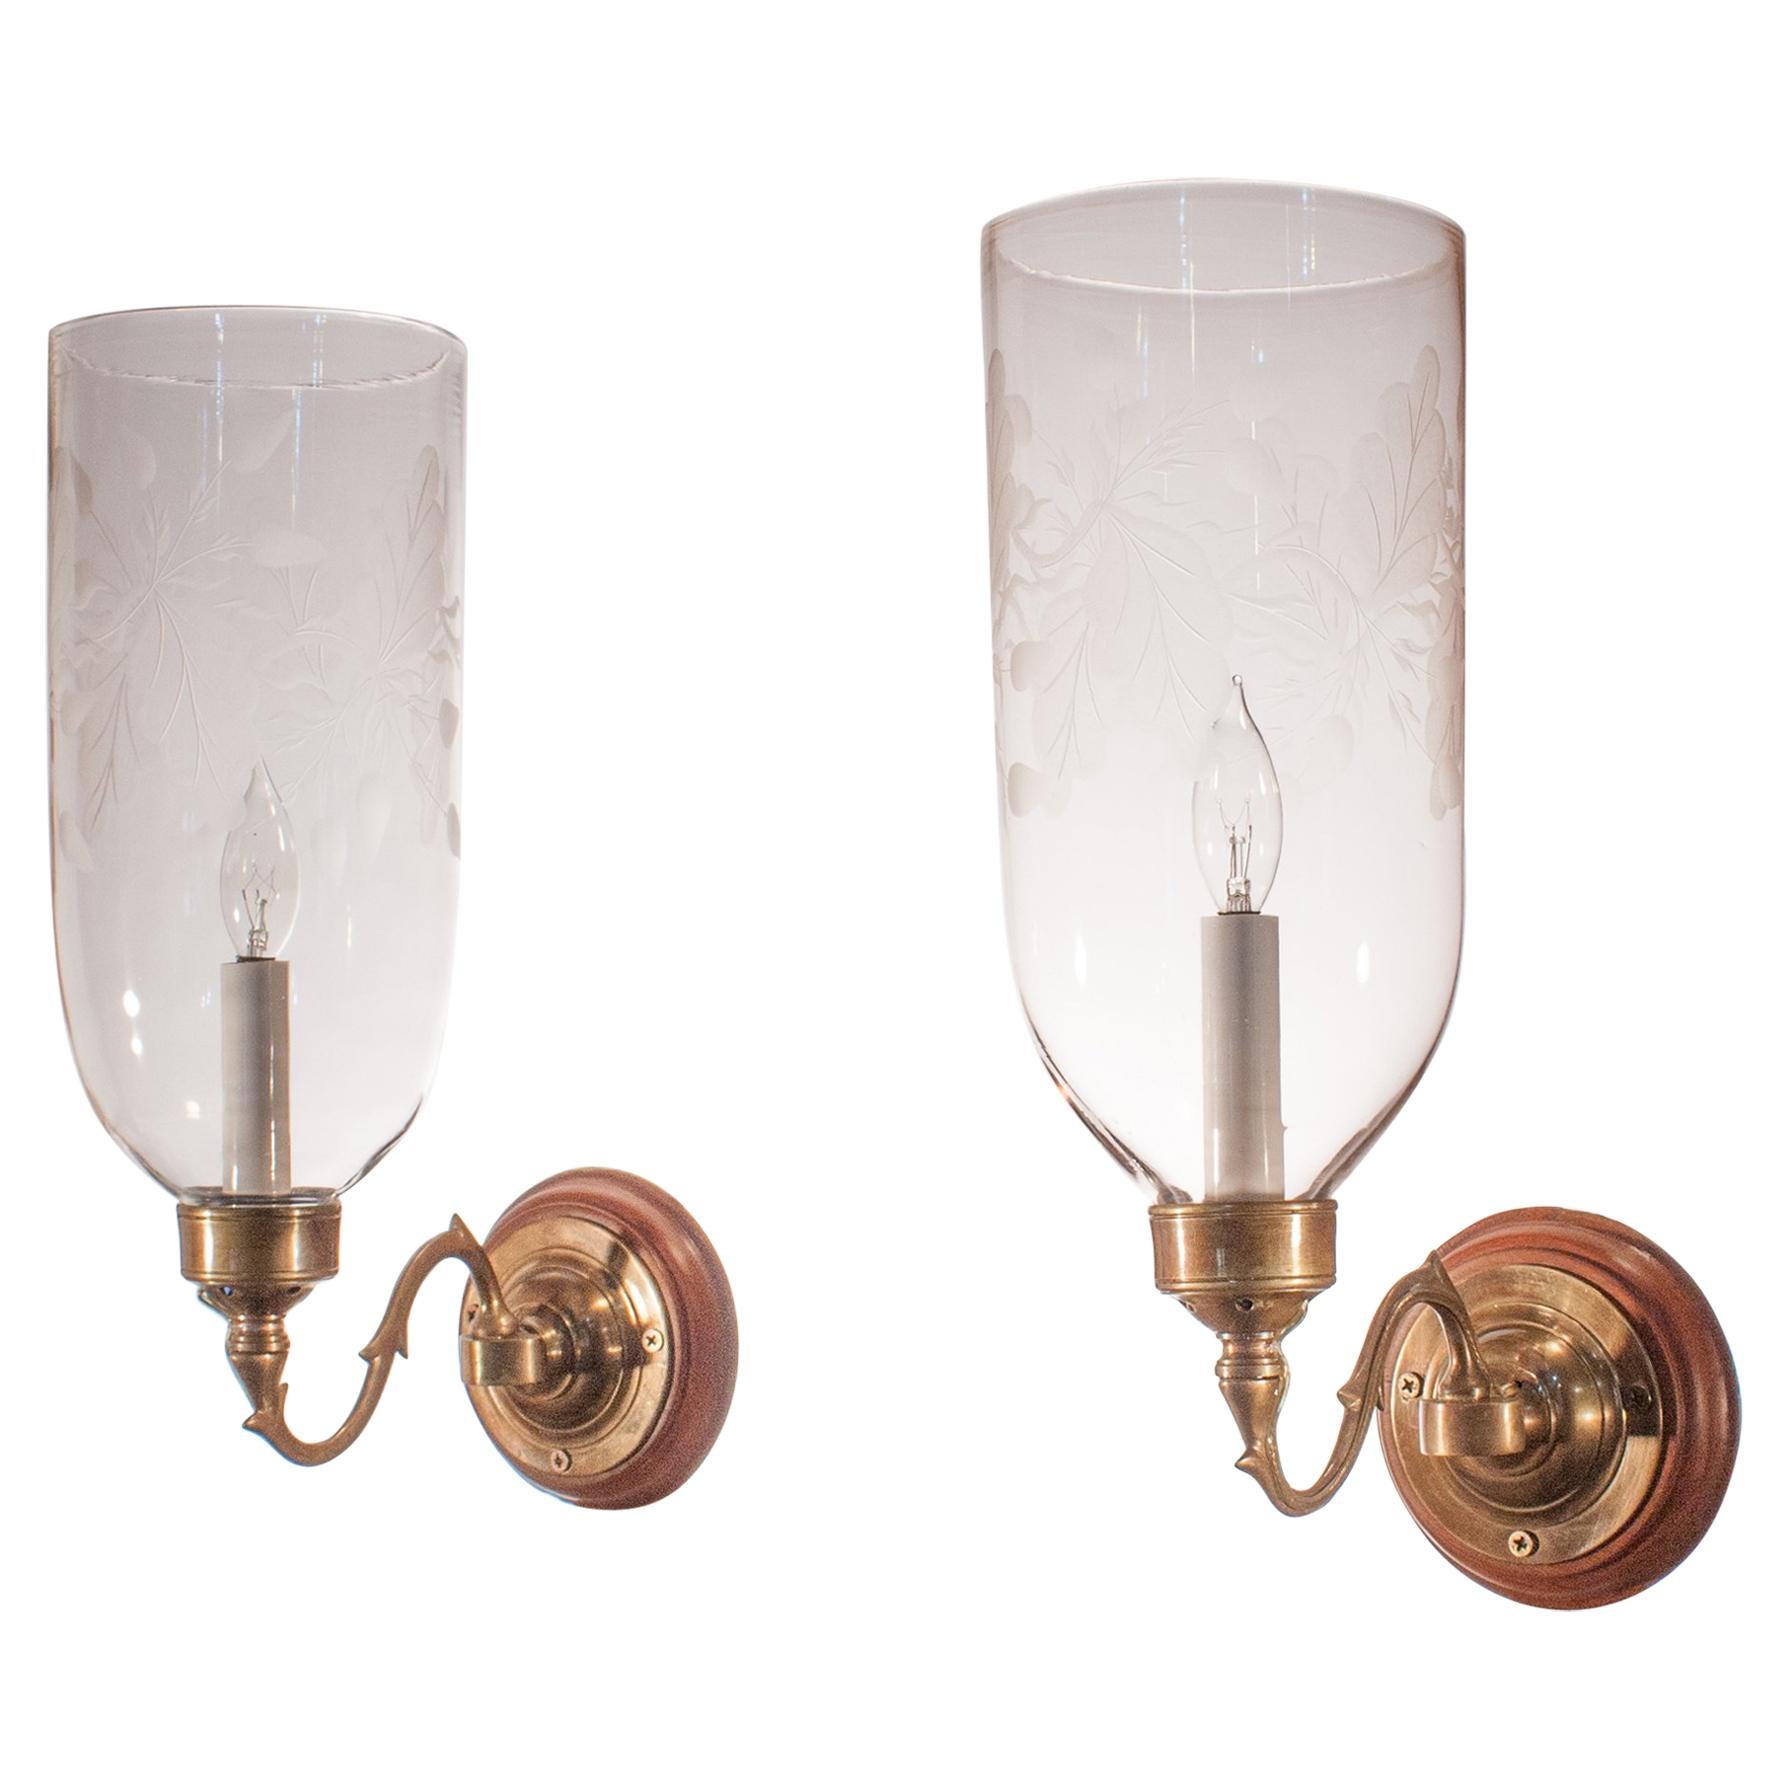 Pair of Hurricane Shade Wall Sconces with Frosted Leaf Etching